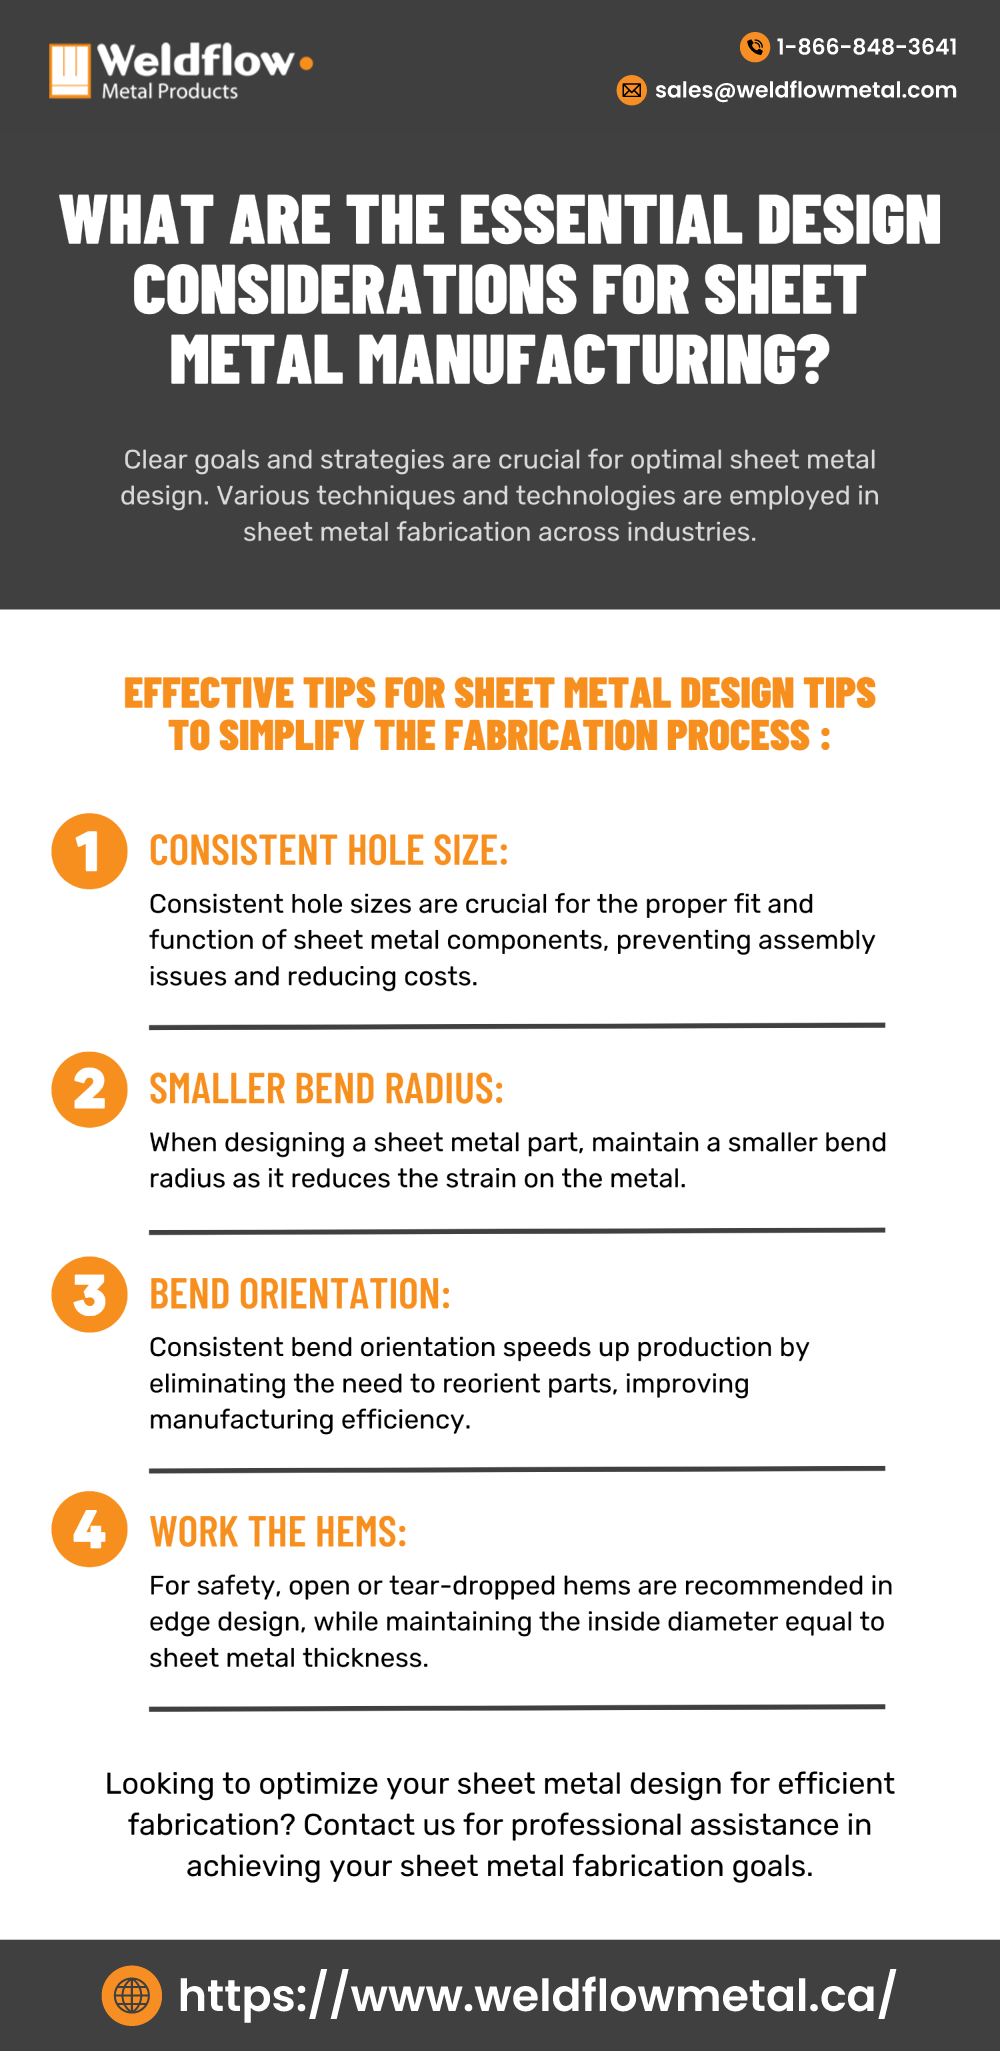 What Are the Essential Design Considerations for Sheet Metal Manufacturing? - Weldflow Metal Products